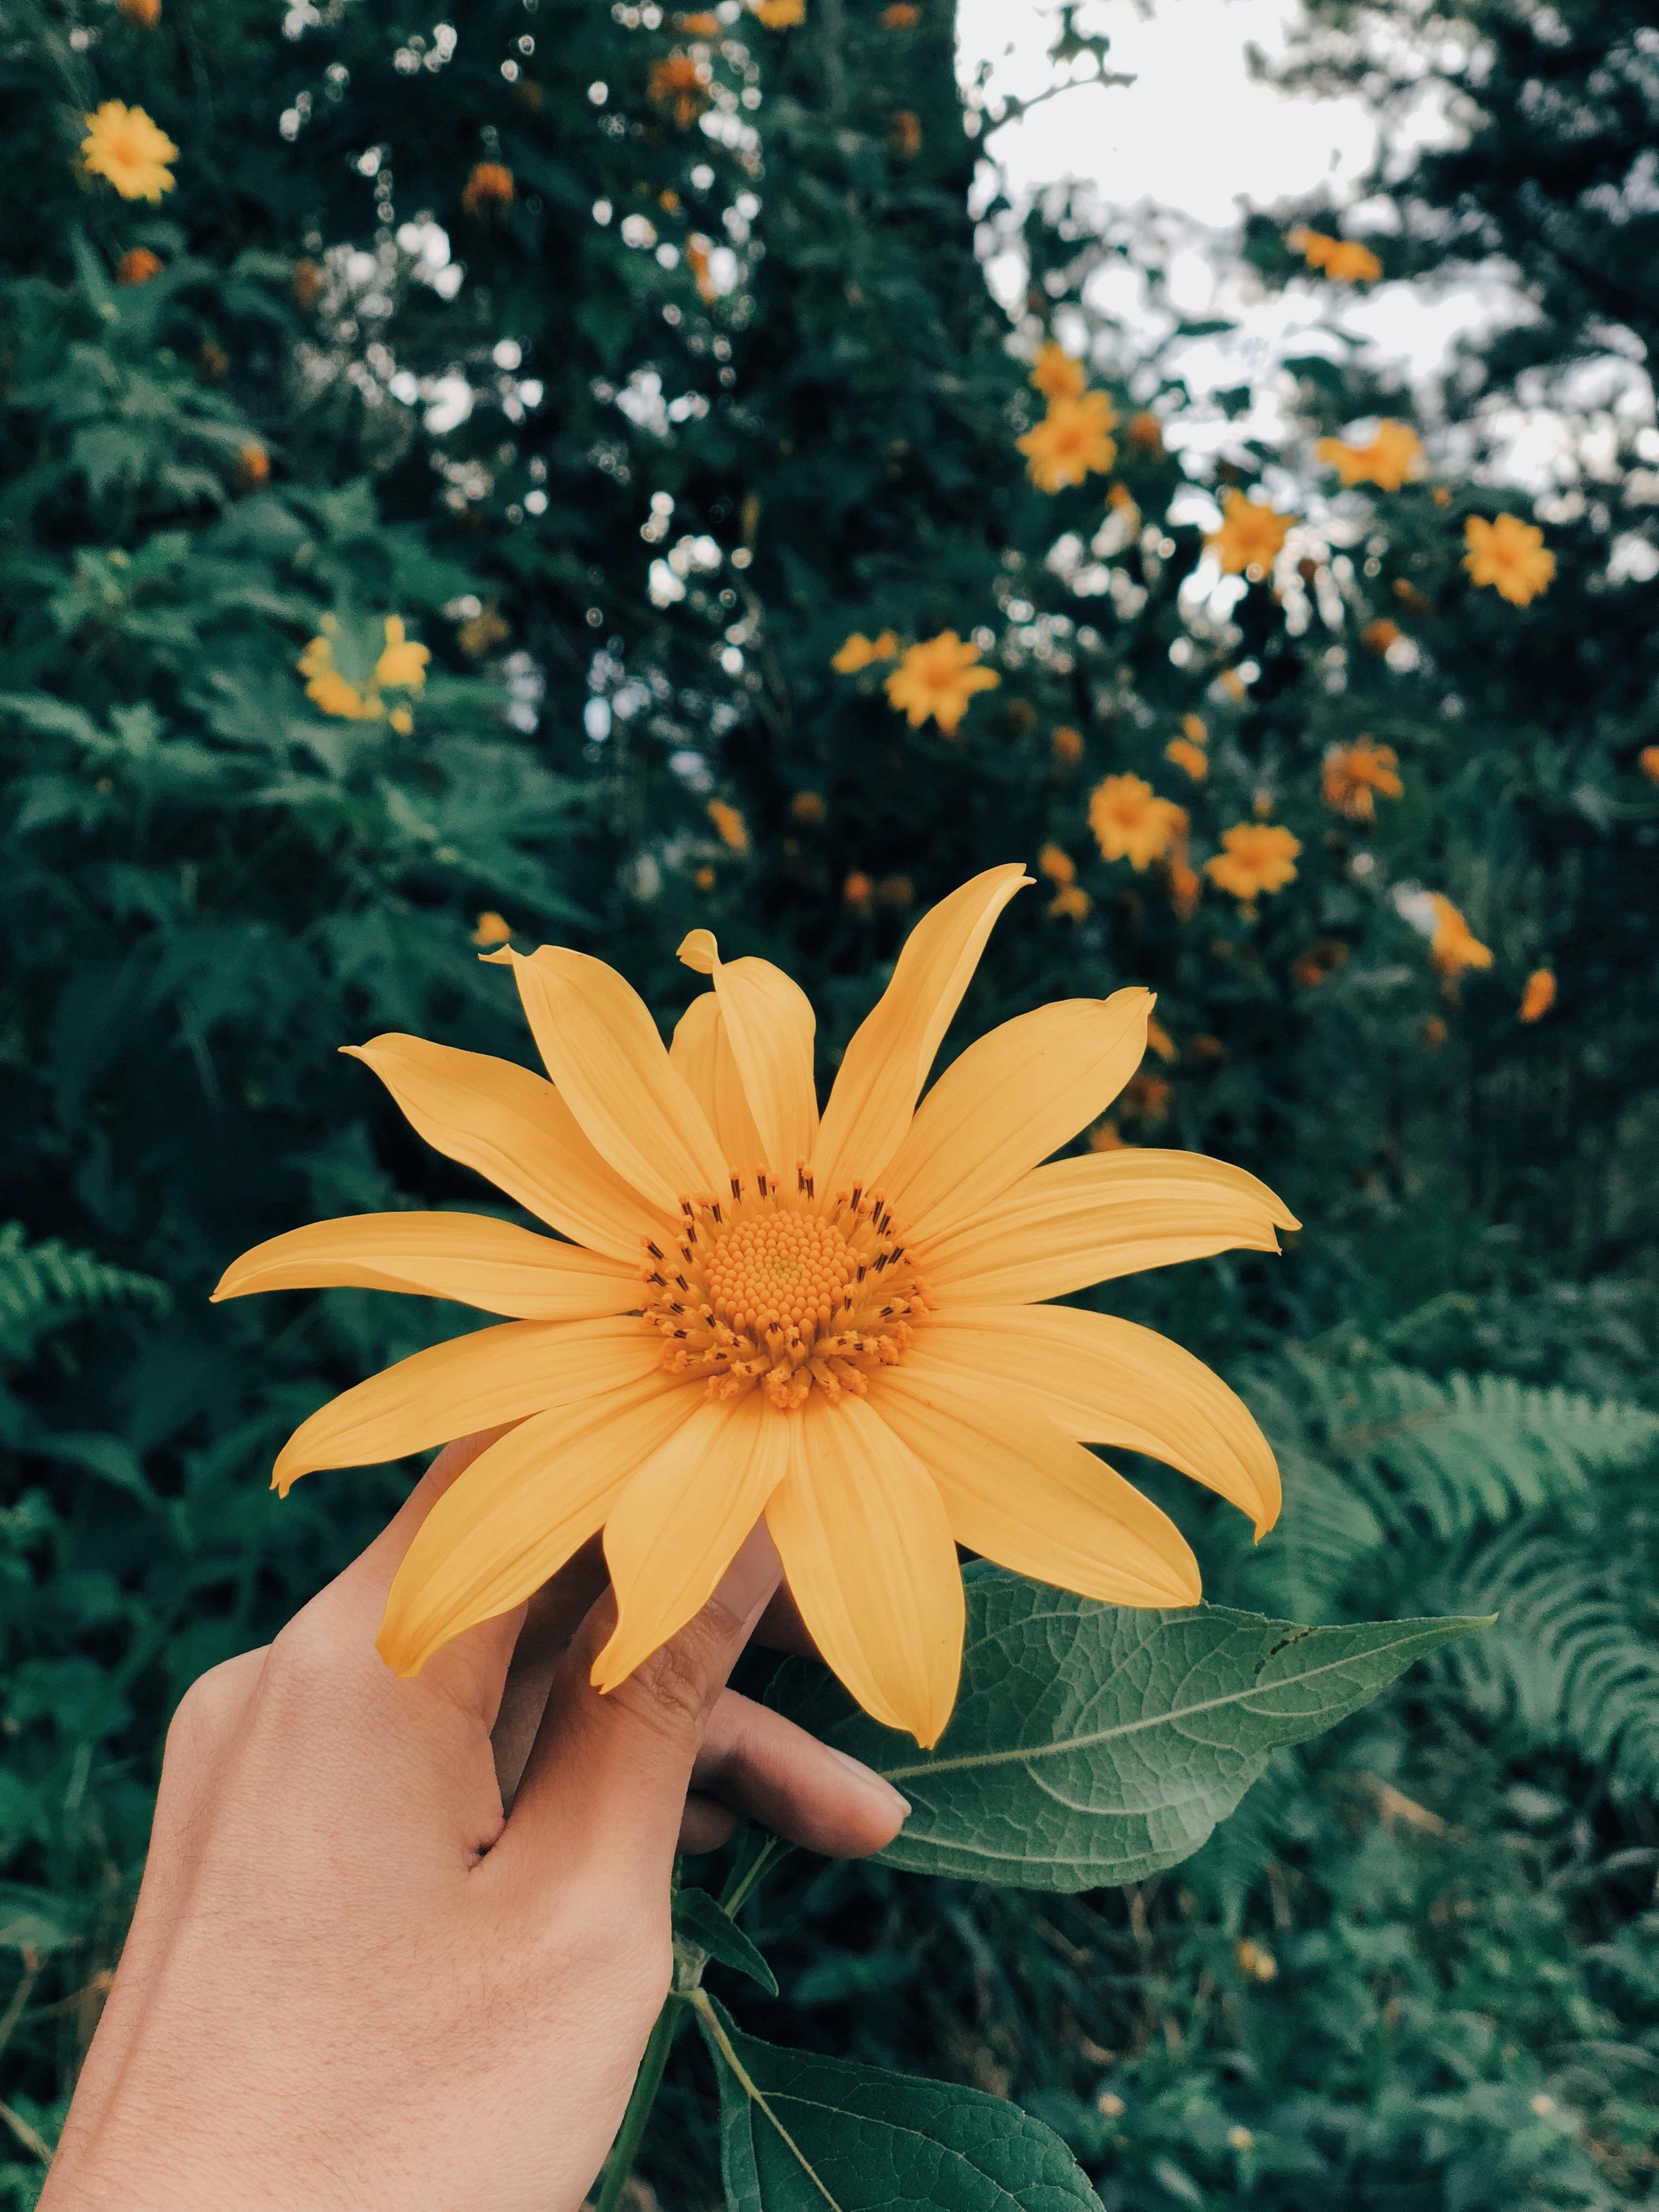 Free stock photo of flower, flower in hand, forest